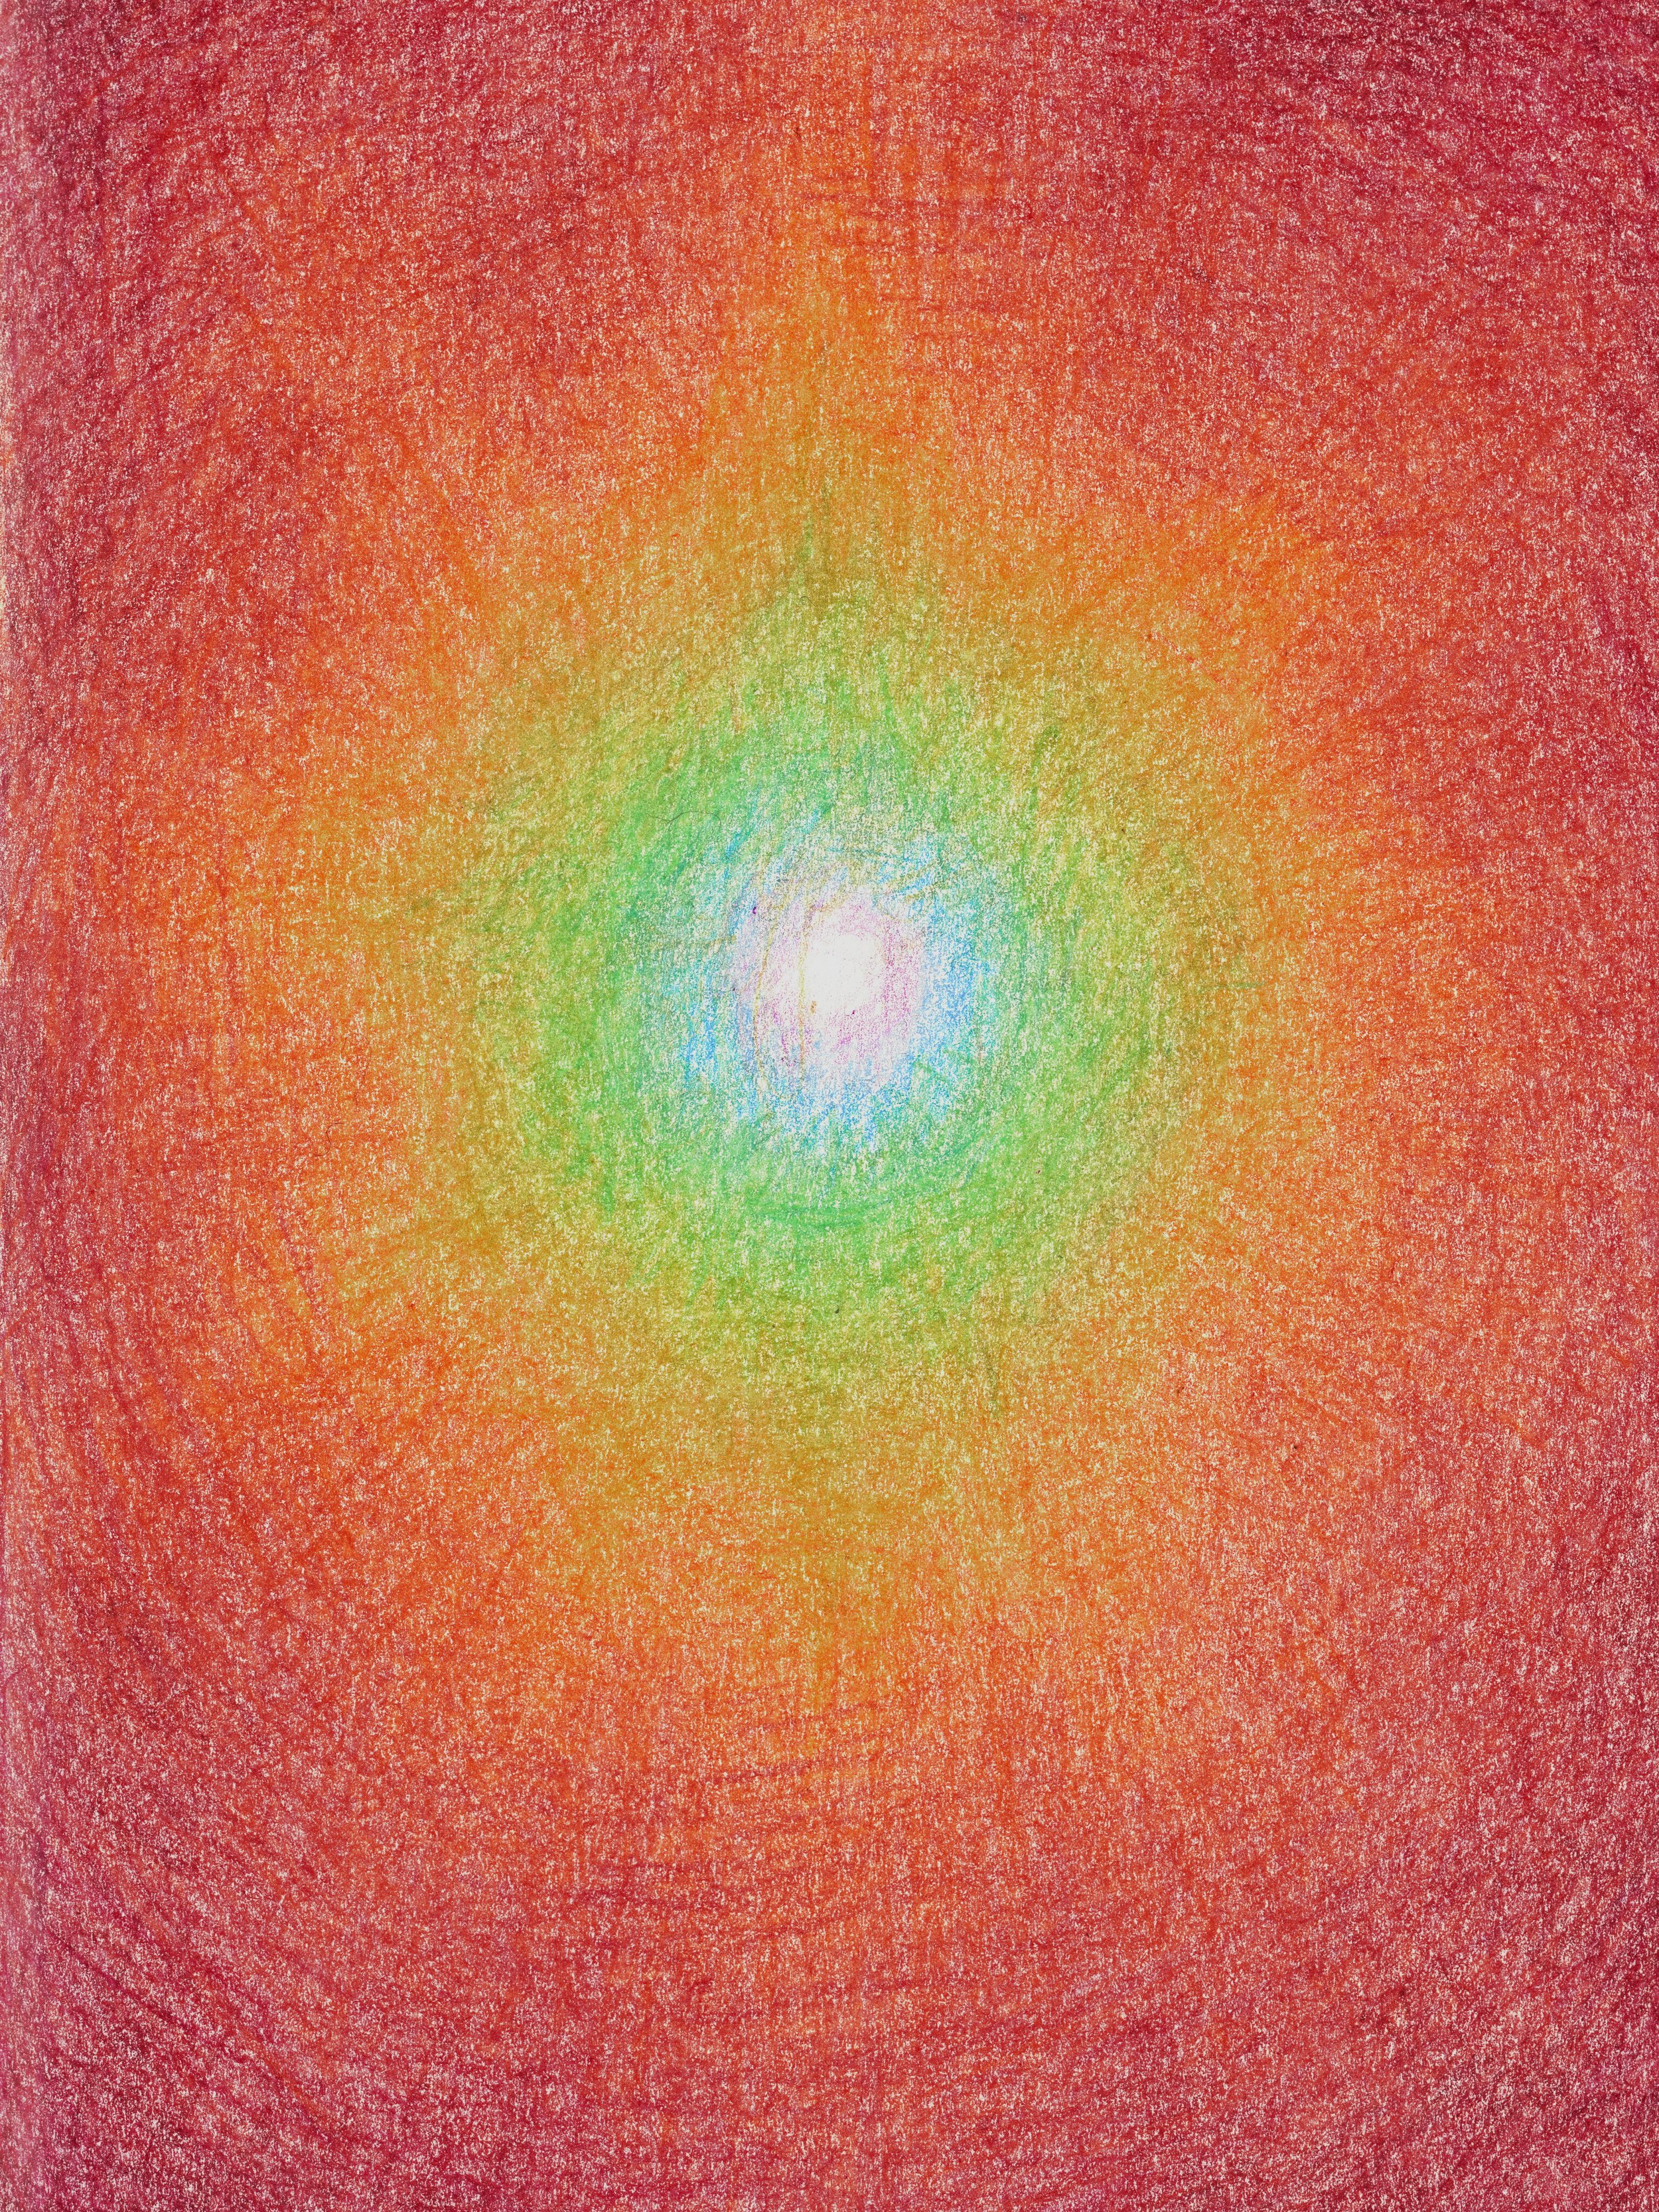    Untitled, 2019  Colored pencil on paper  6.5 in x 5 in   